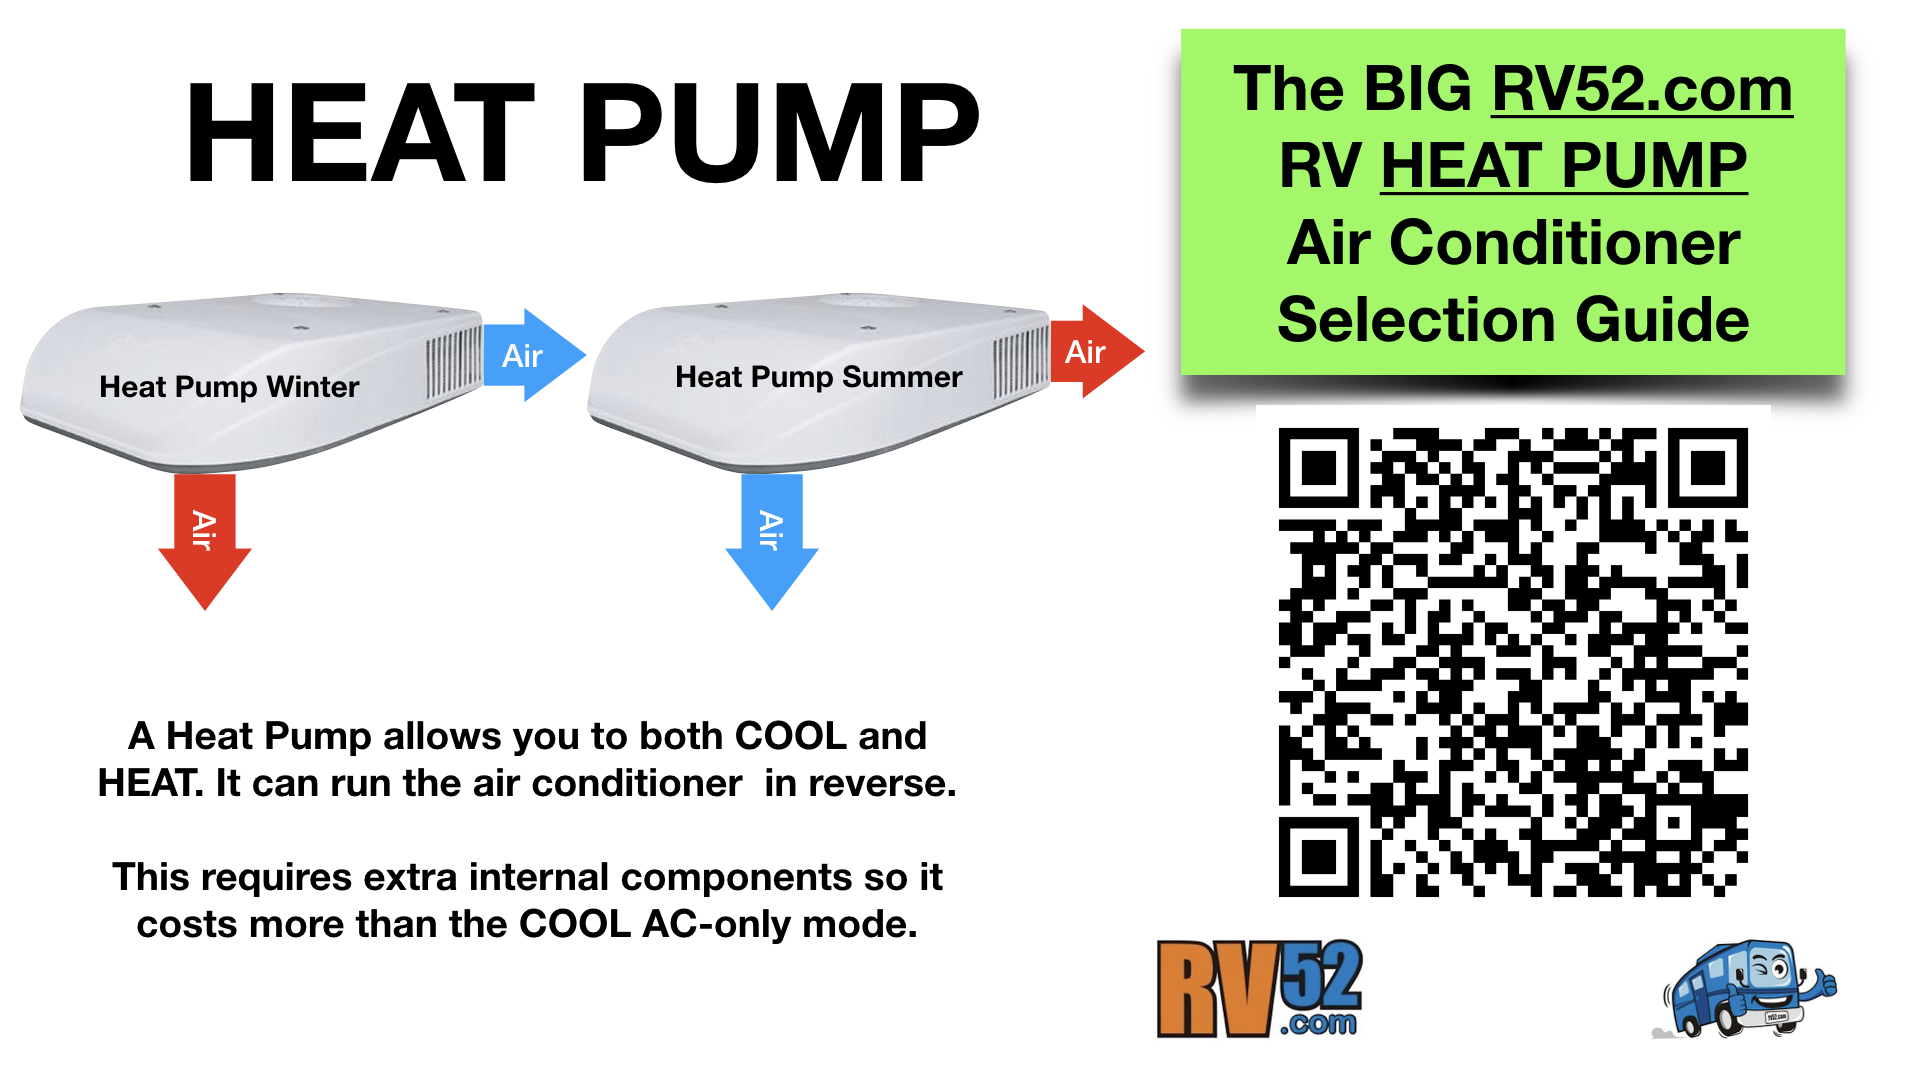 RV Heat Pump Air Conditioner Selection Guide